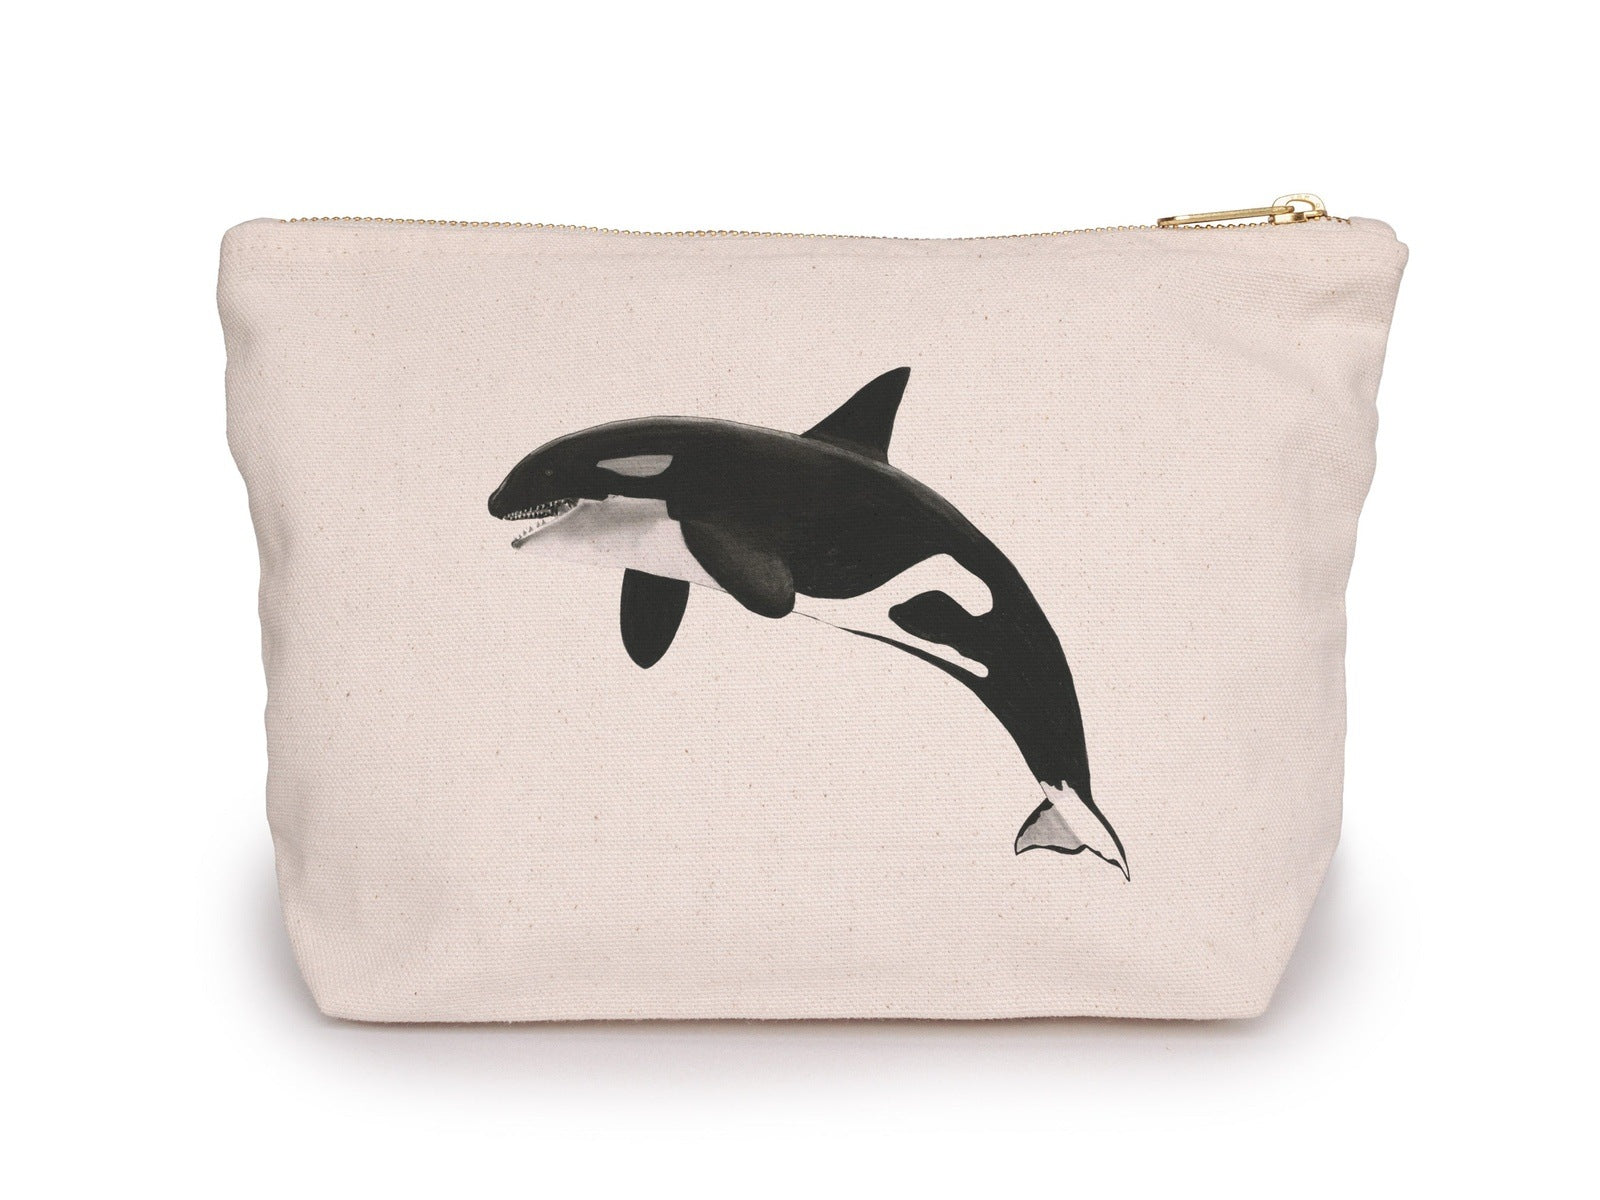 Lynx the Killer Whale Cotton Lined Mini Pouch Zip Bag From Libra Fine Arts